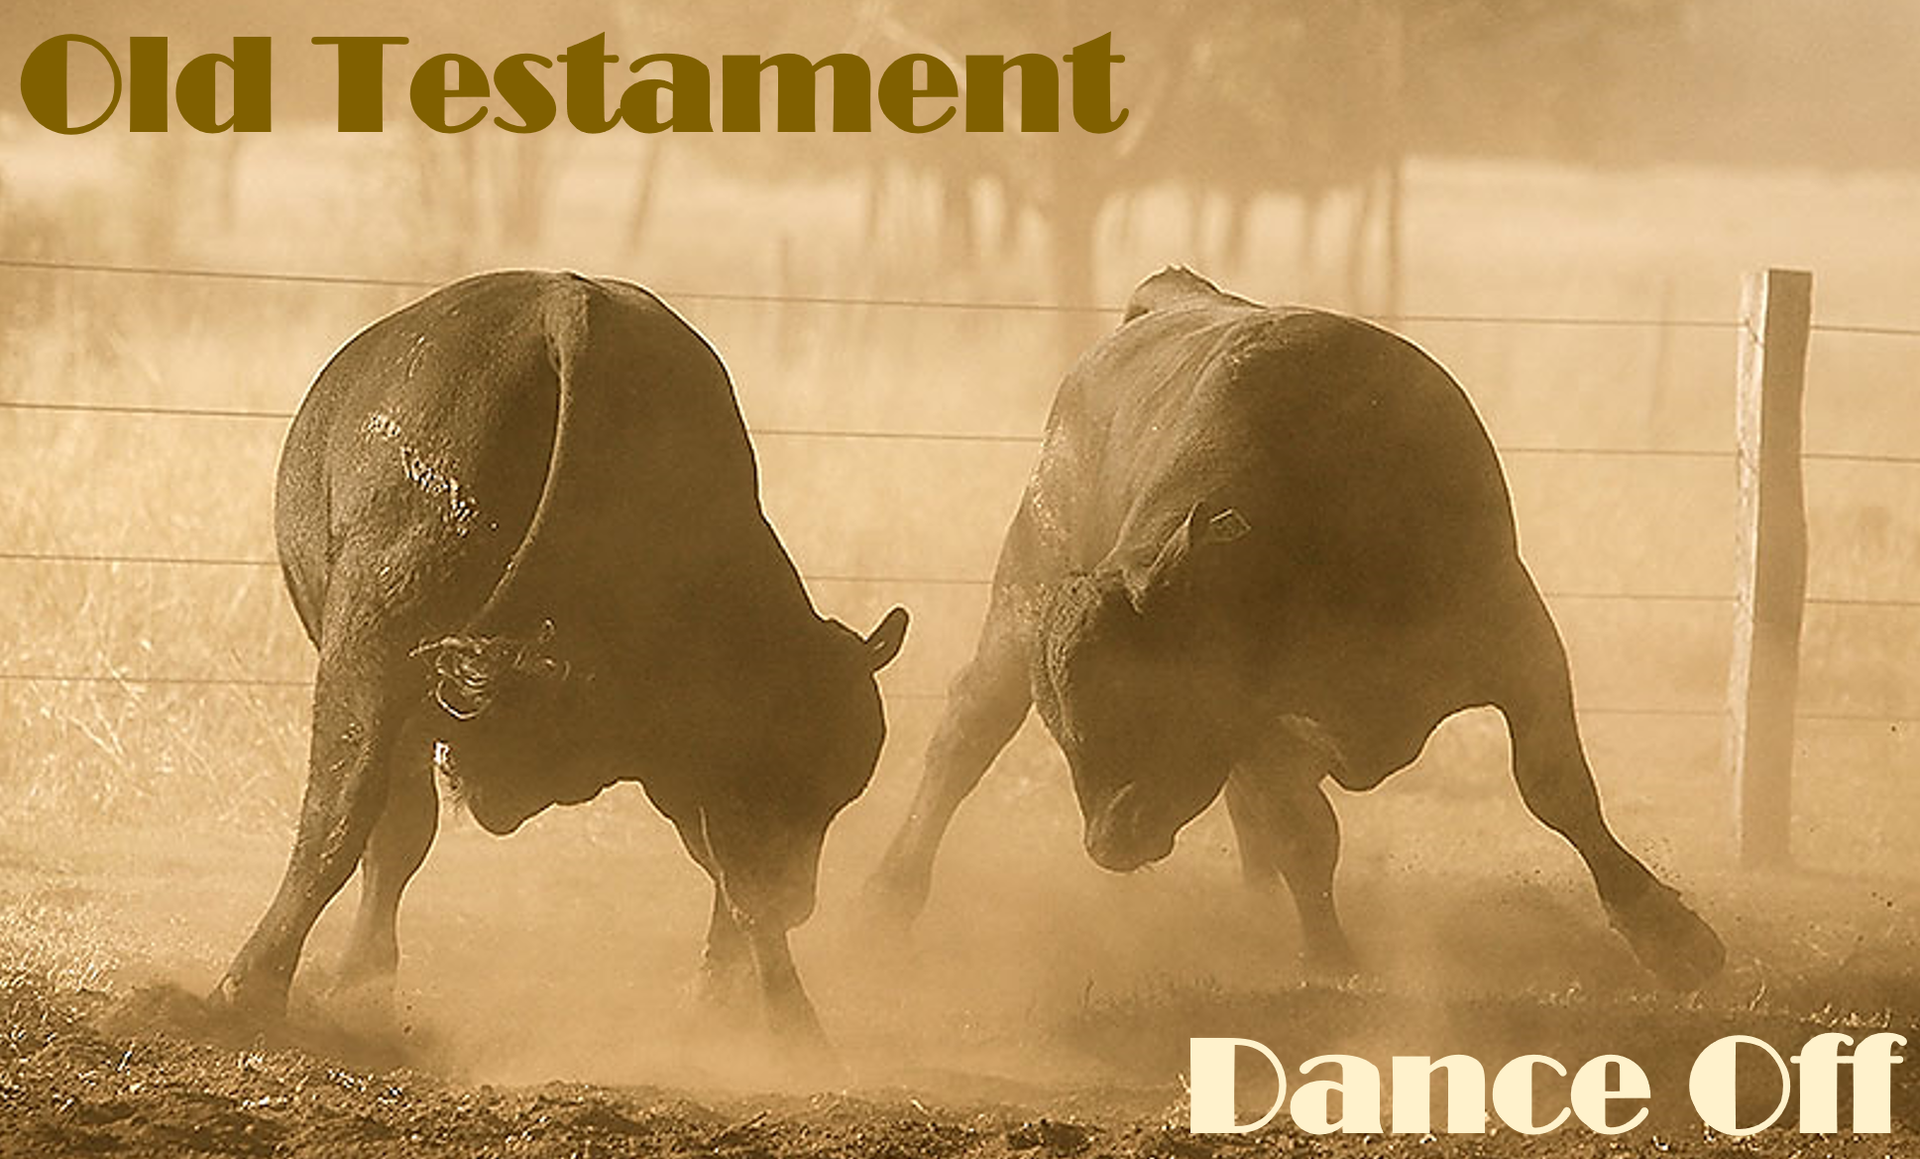 Two fully grown bulls fighting each other. The whole image is a dusty brown color